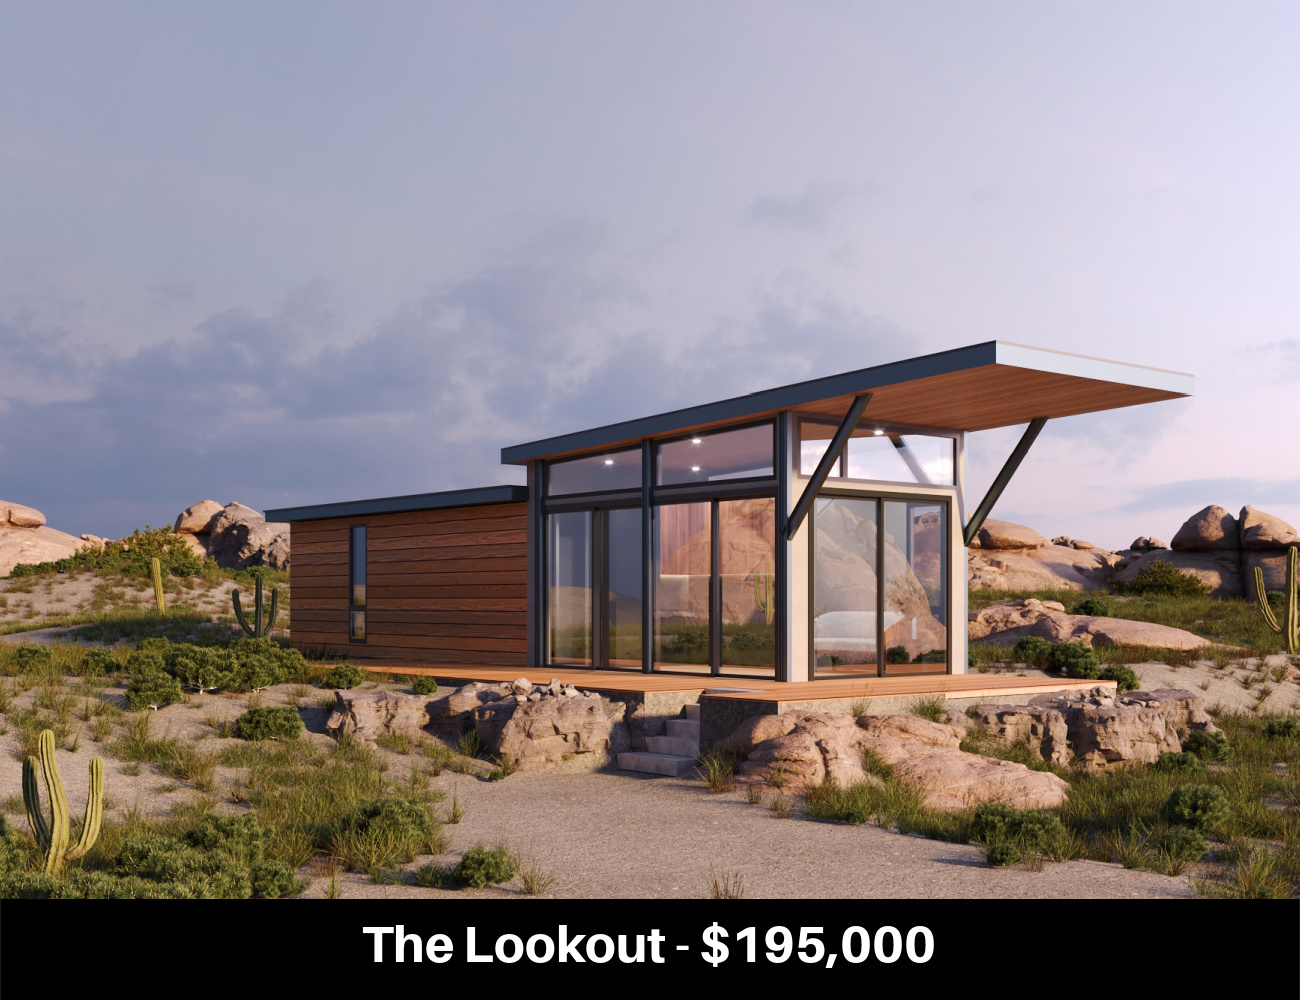 The Lookout - $195,000